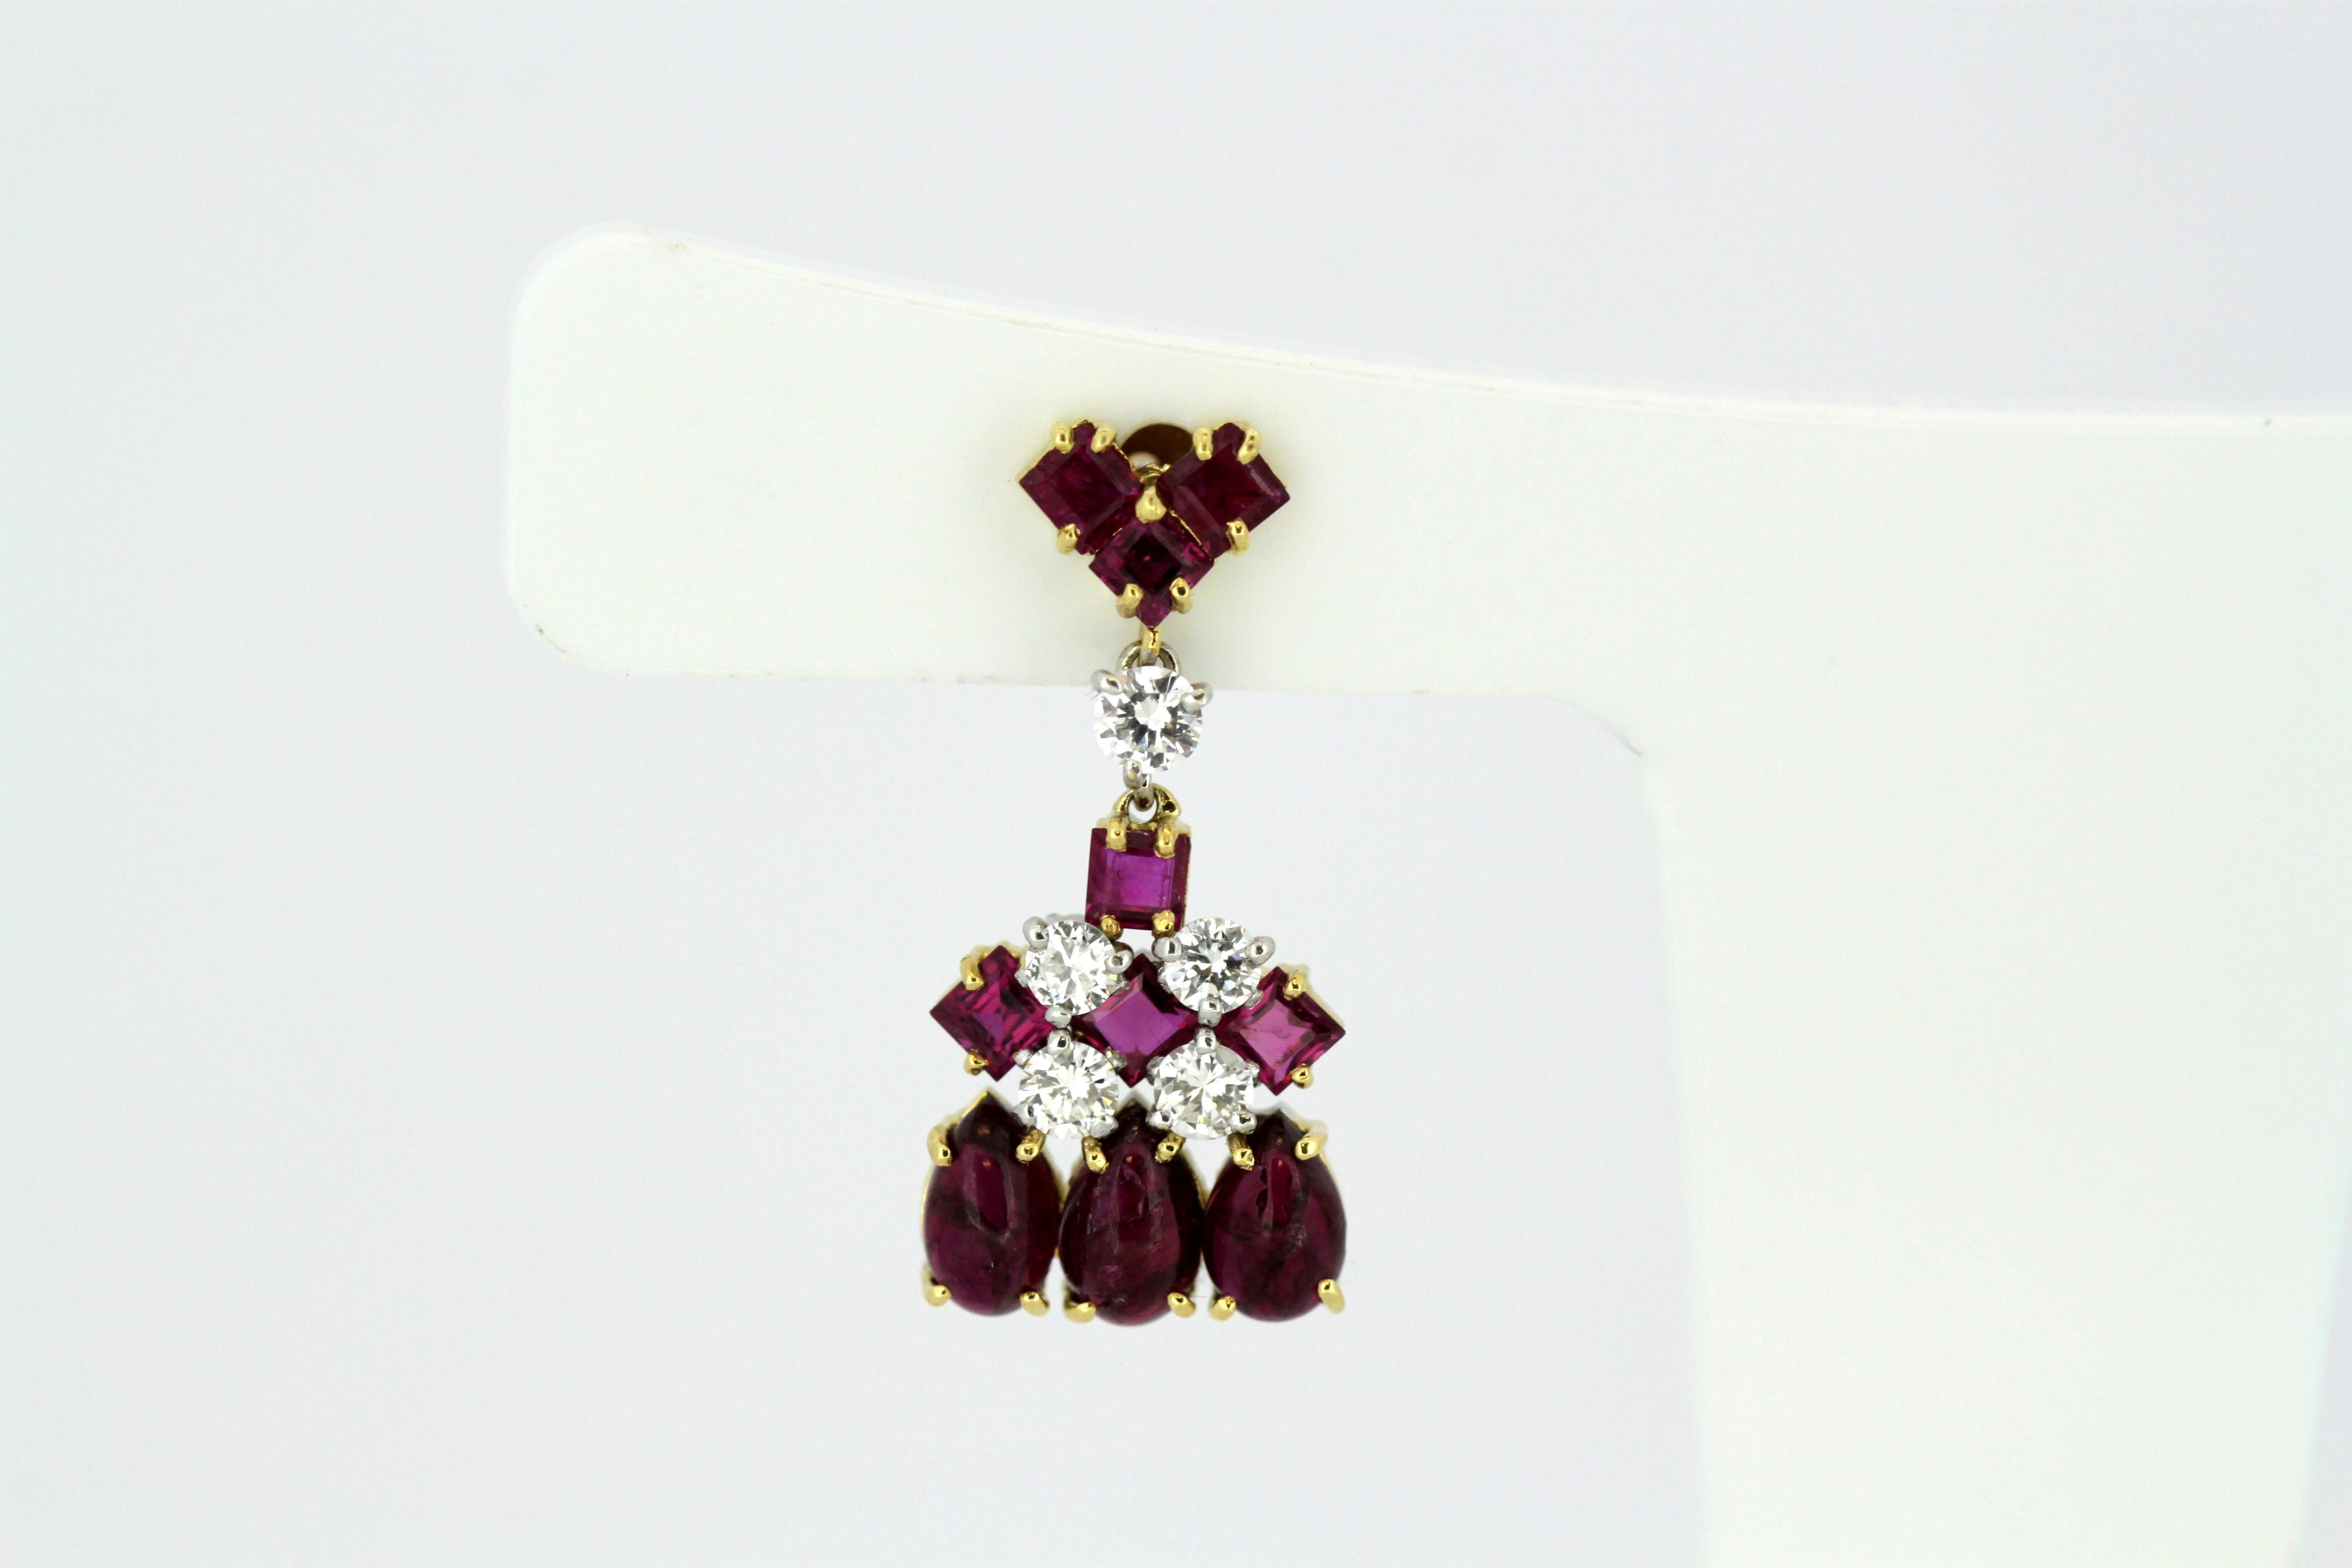 Vintage 18kt yellow gold ladies stud earrings with rubies and diamonds.
Studs are stamped 750.

Dimensions -
Size : 2.3 x 1.1 x 1 cm
Weight : 4 grams total

Rubies - 
Cut : Round & Pear
Total number of rubies : 20
Approx total weight : 1.16